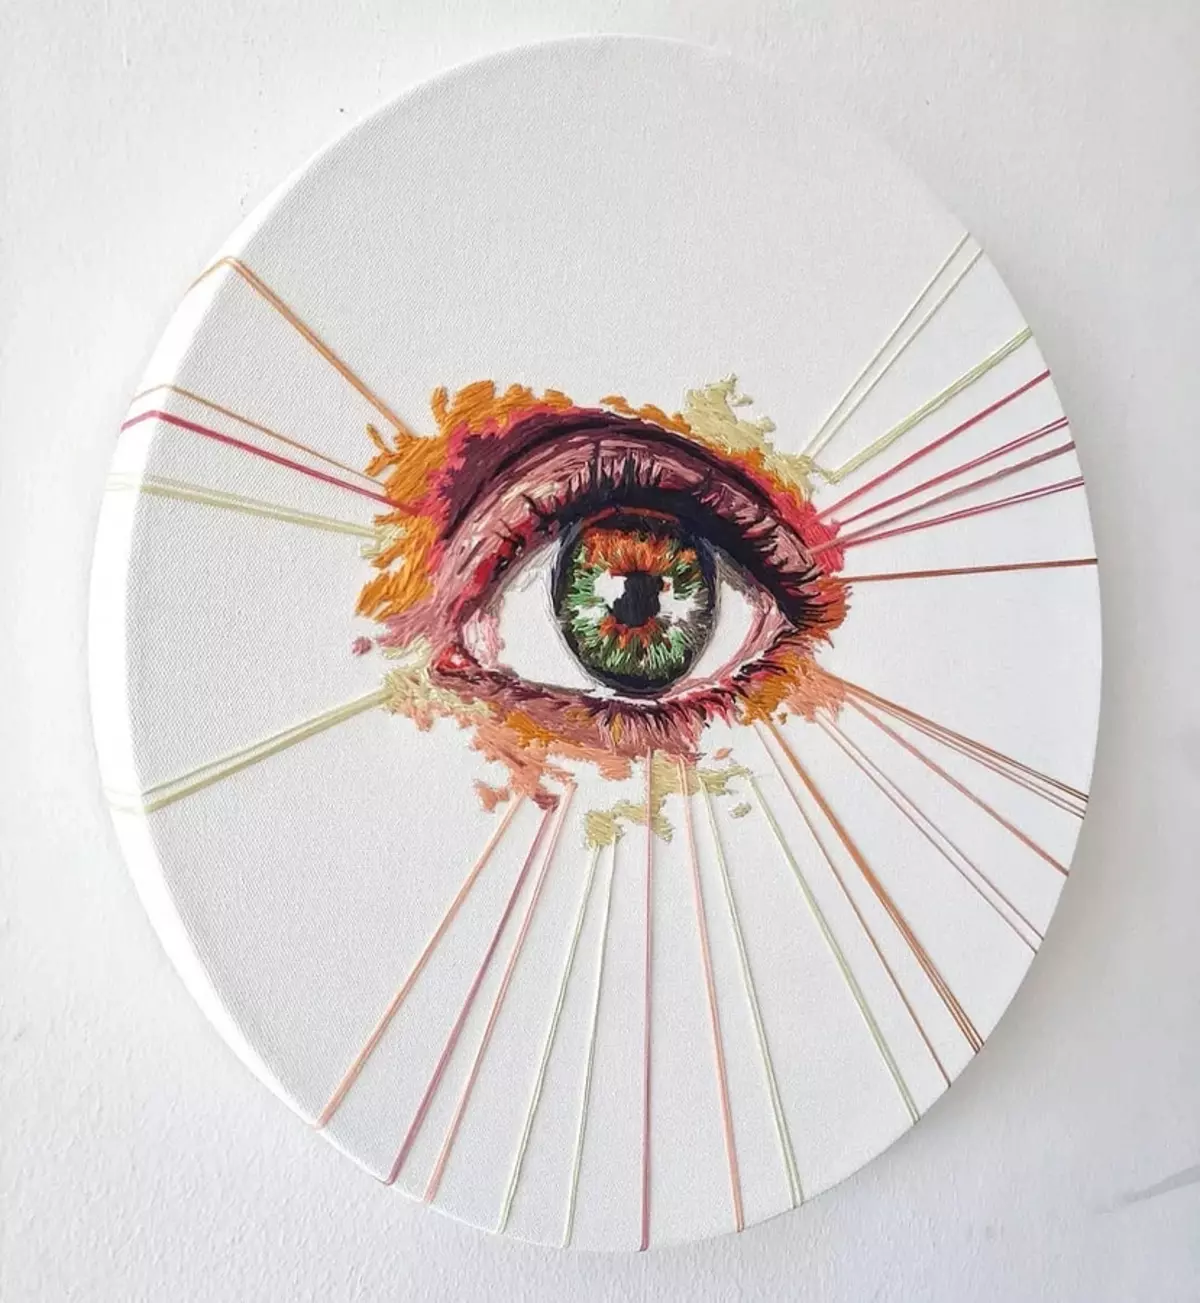 Colorful patterns created by needle and thread: needlework Instagram week